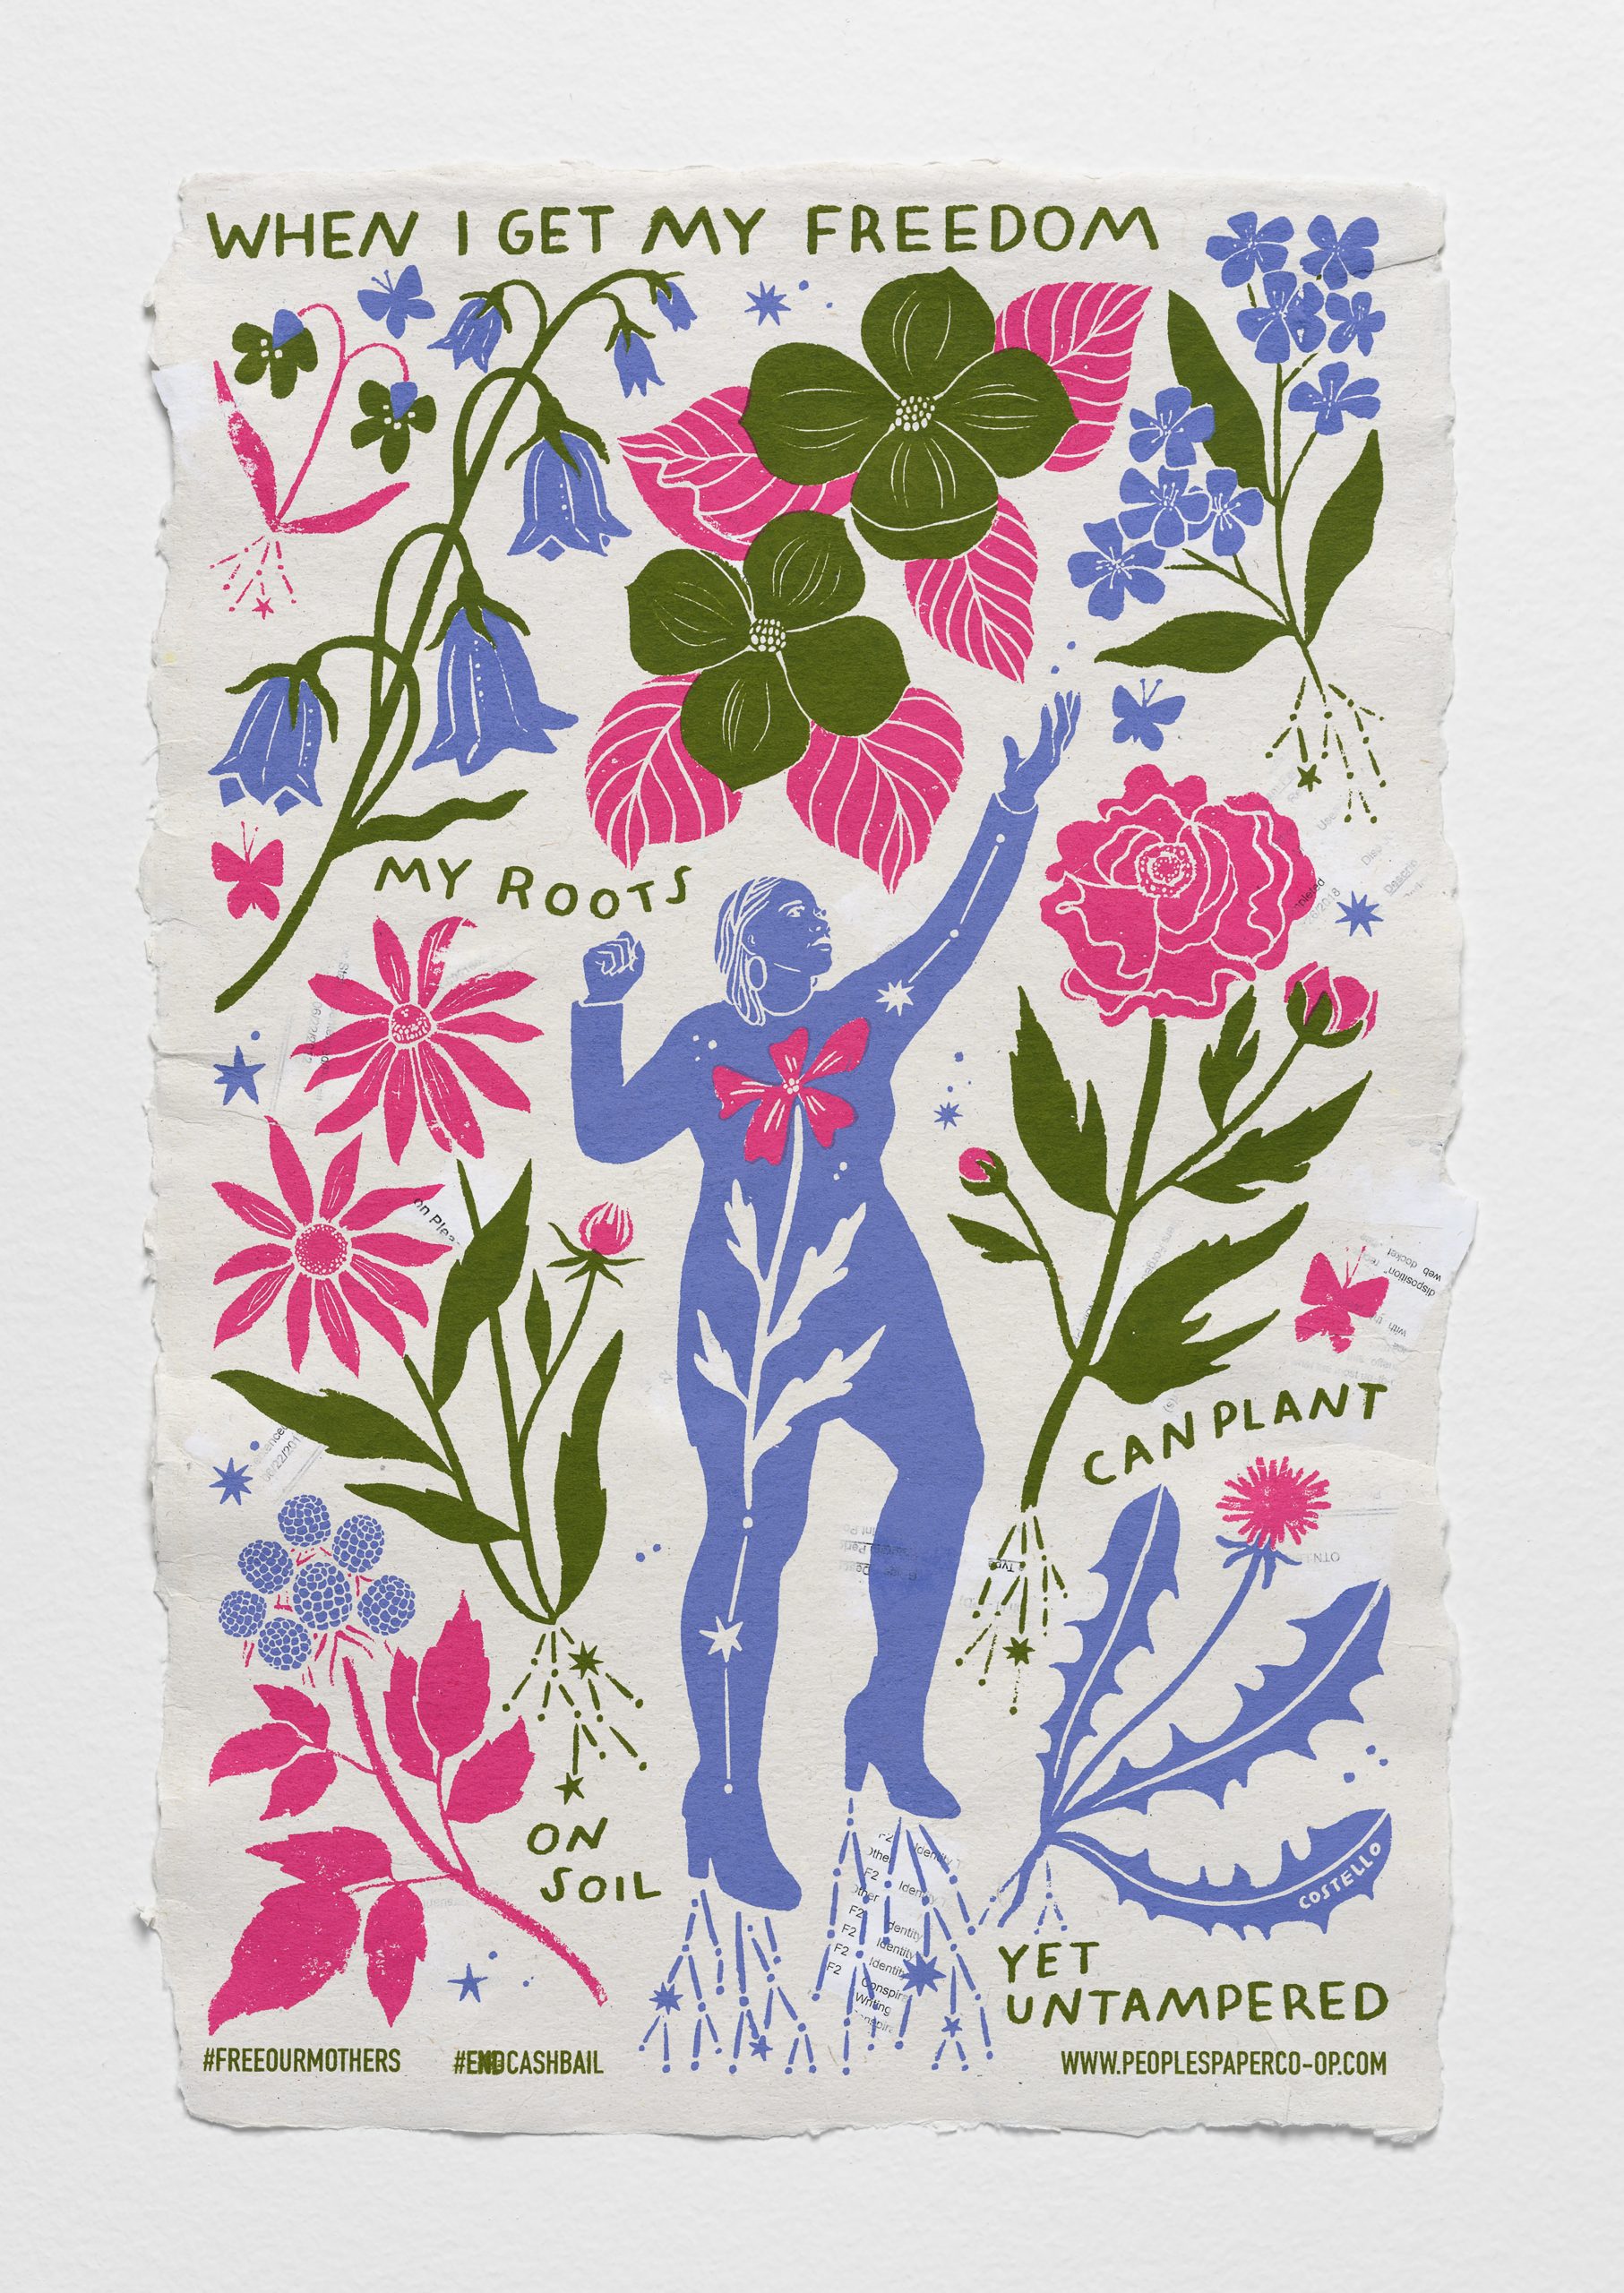 A female figure among purple, pink and green flowers and plants, screen printed on paper made from criminal records.The words 